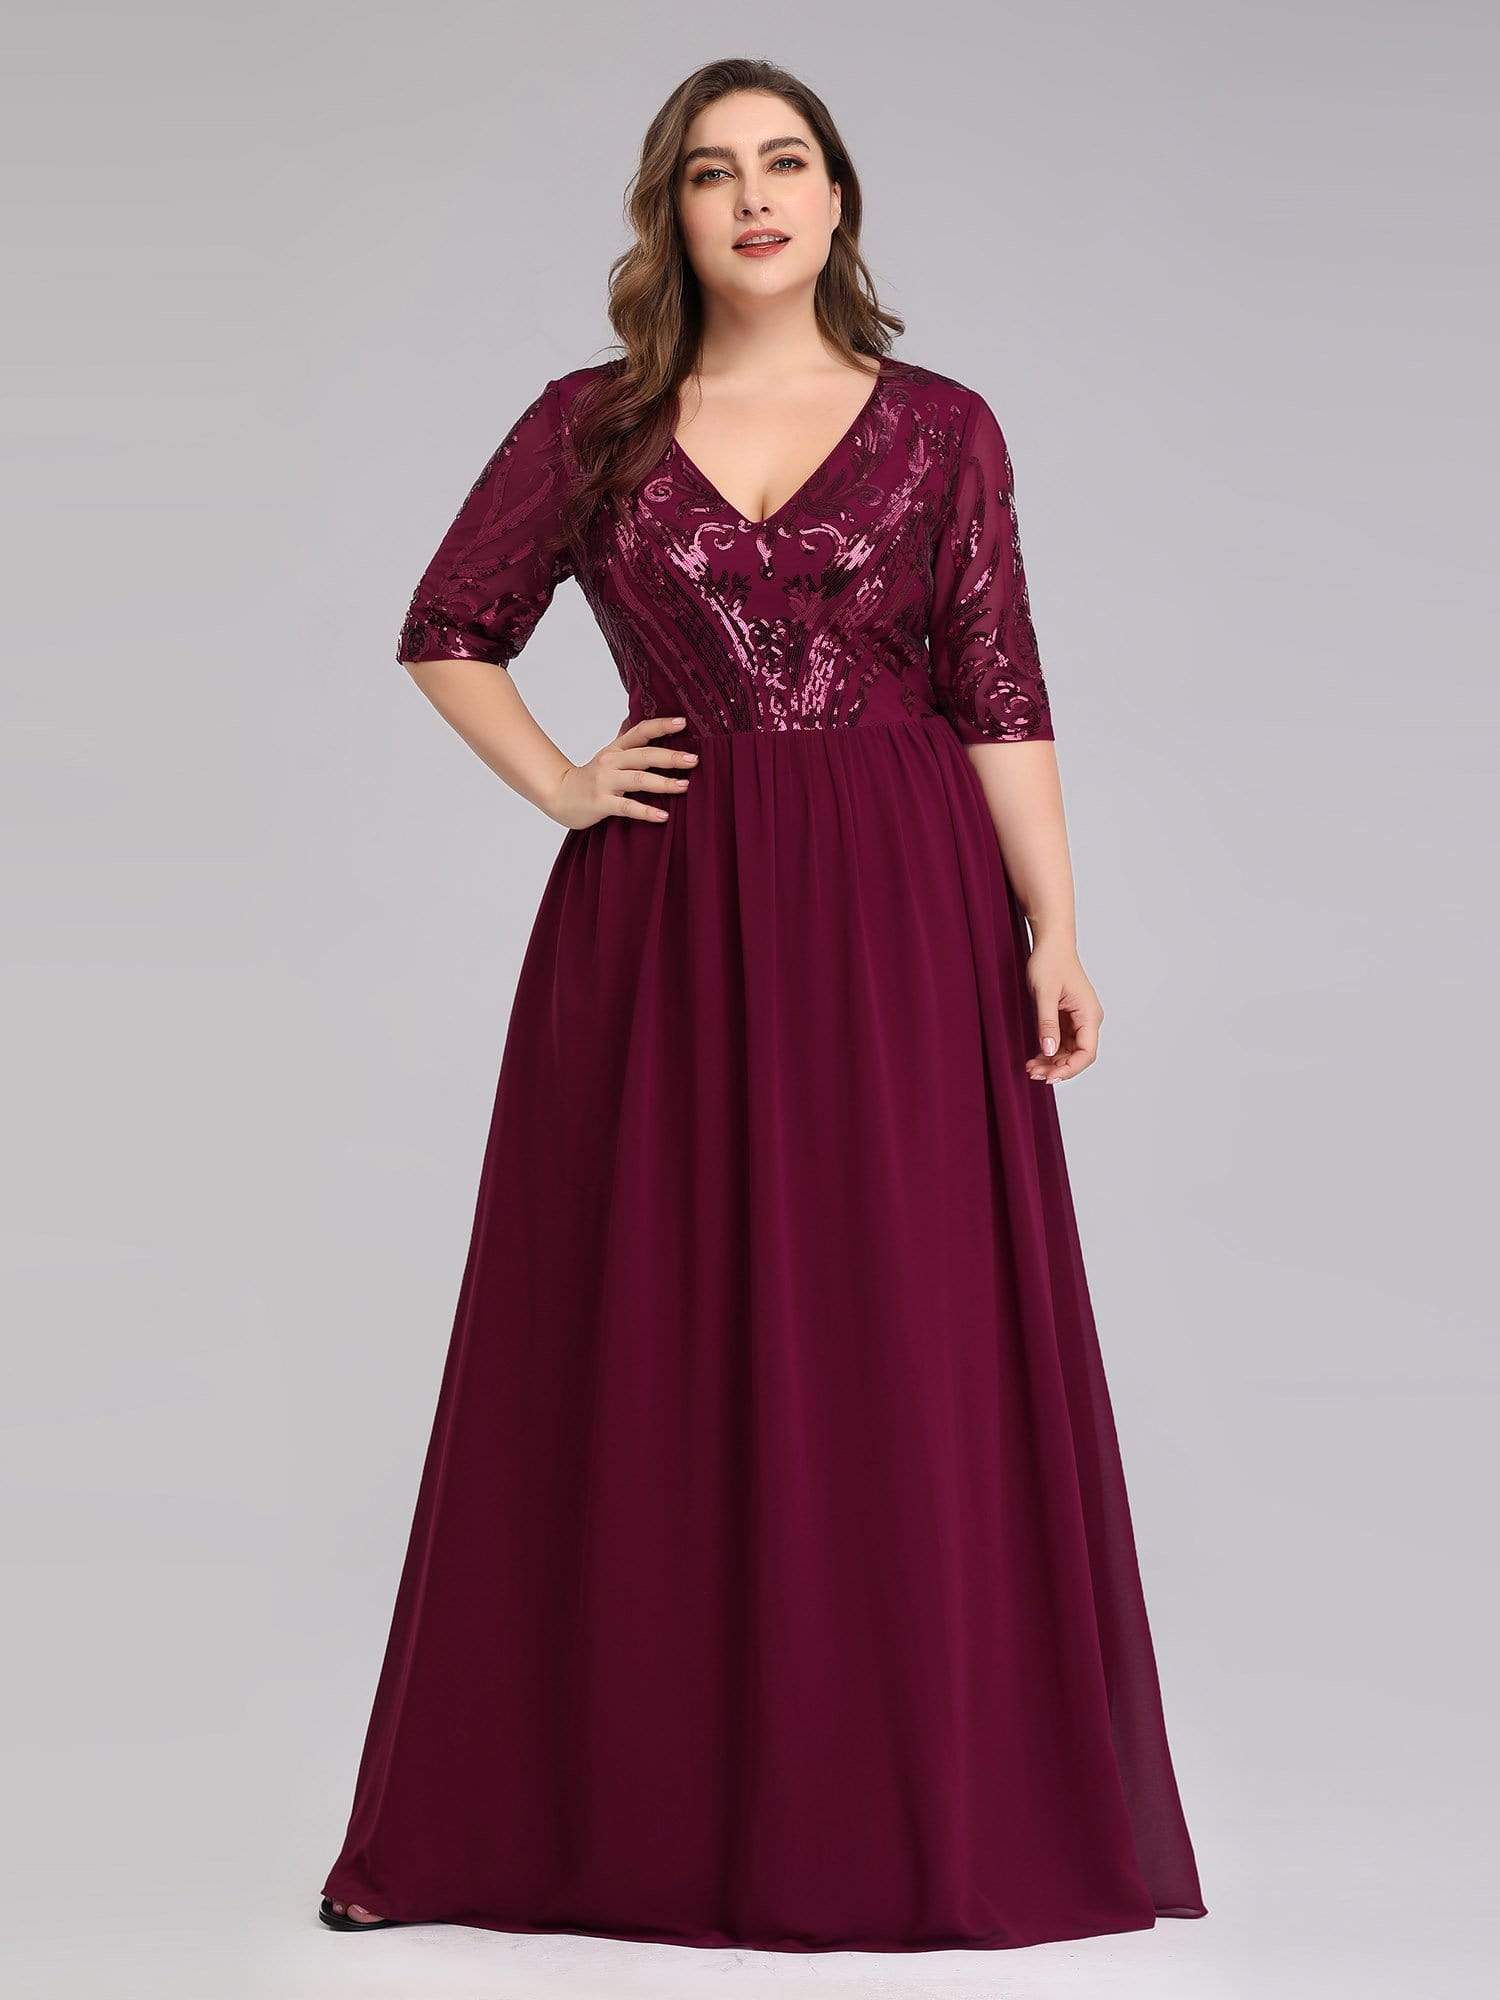 Plus Size Mother Of The Bride Dresses For Weddings with Half Sleeve